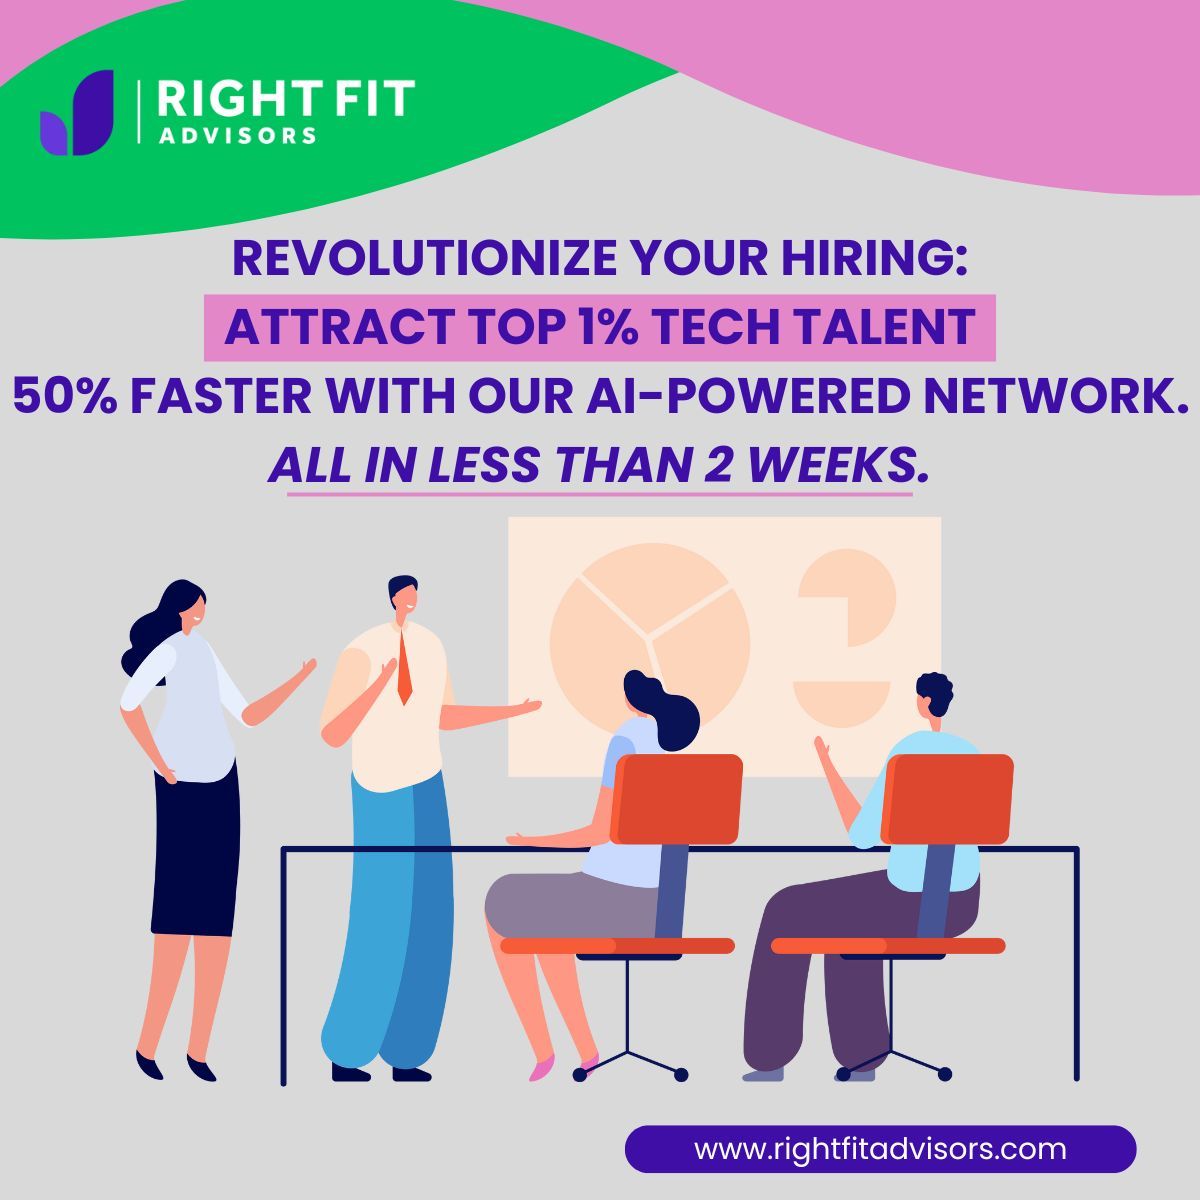 🌟 Revolutionize your hiring process! 🌟 Attract the top 1% of tech talent 50% faster with our AI-powered network. All achieved in less than 2 weeks. 🚀💼 #TechTalent #HiringRevolution #AIRecruitment #FasterHiring #InnovativeSolutions #TopTalent #RecruitmentEfficiency